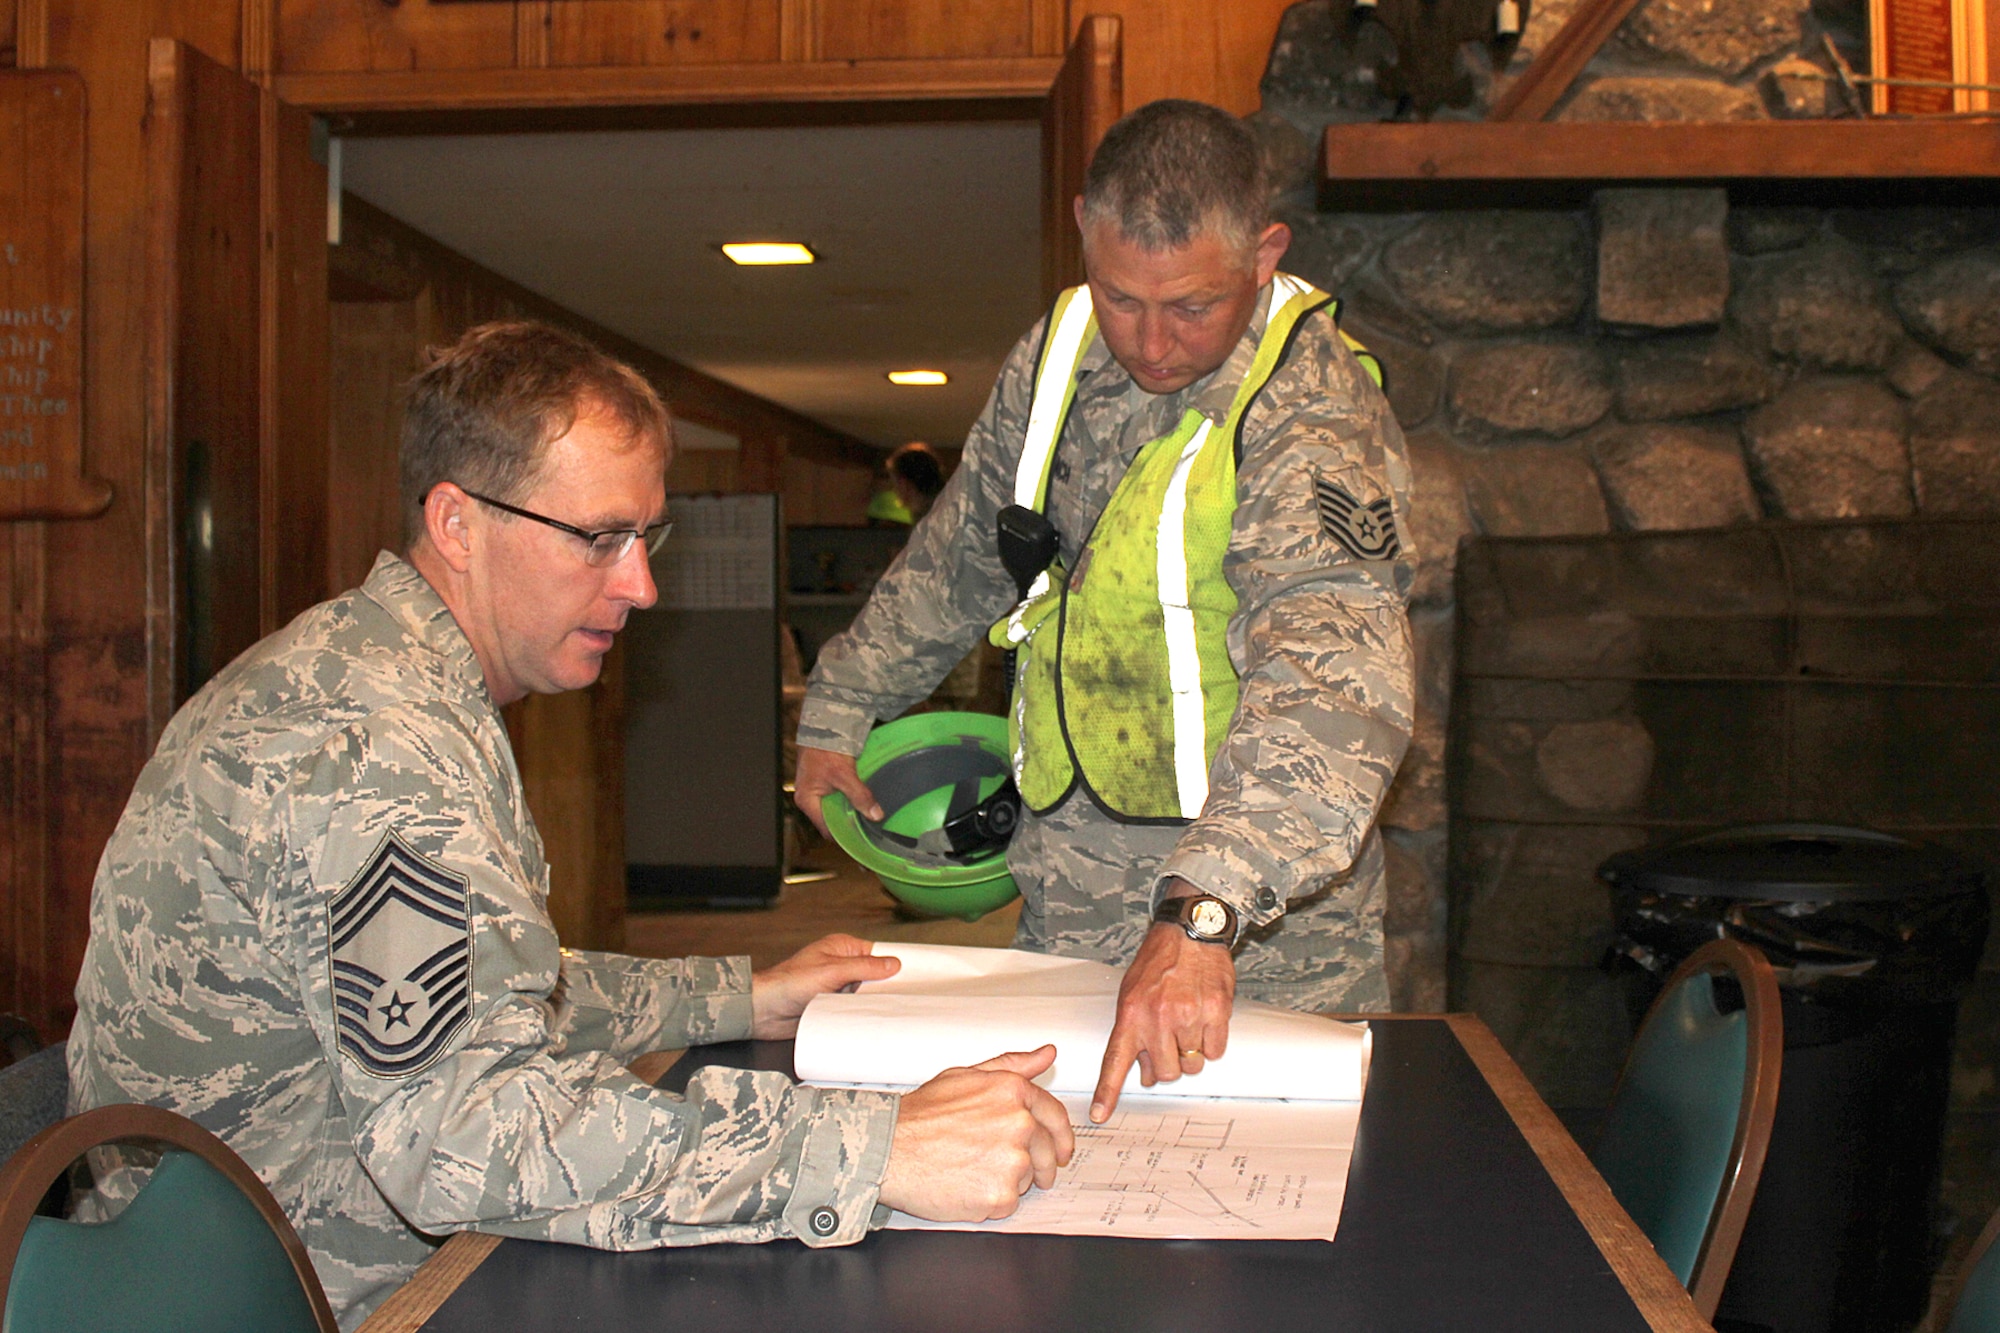 140521-Z-VA676-020 -- Chief Master Sgt. Jeff Talaga and Technical Sgt. Dan Gerlach review a set of building plans prior to beginning the day?s work at Camp Hinds Boy Scout Camp, Raymond, Maine, May 21, 2014. Talaga and Gerlach are members of the 127th Civil Engineer Squadron, based at Selfridge Air National Guard Base, Mich. The Airmen, along with Marine Corps Reservists and Army Reservists, are working on various construction projects at the camp during an Innovative Readiness Training mission, which allows military personnel to get training in various tasks and a community organization, in this case the Boy Scouts, to benefit from the work. (U.S. Air National Guard photo by Technical Sgt. Dan Heaton)